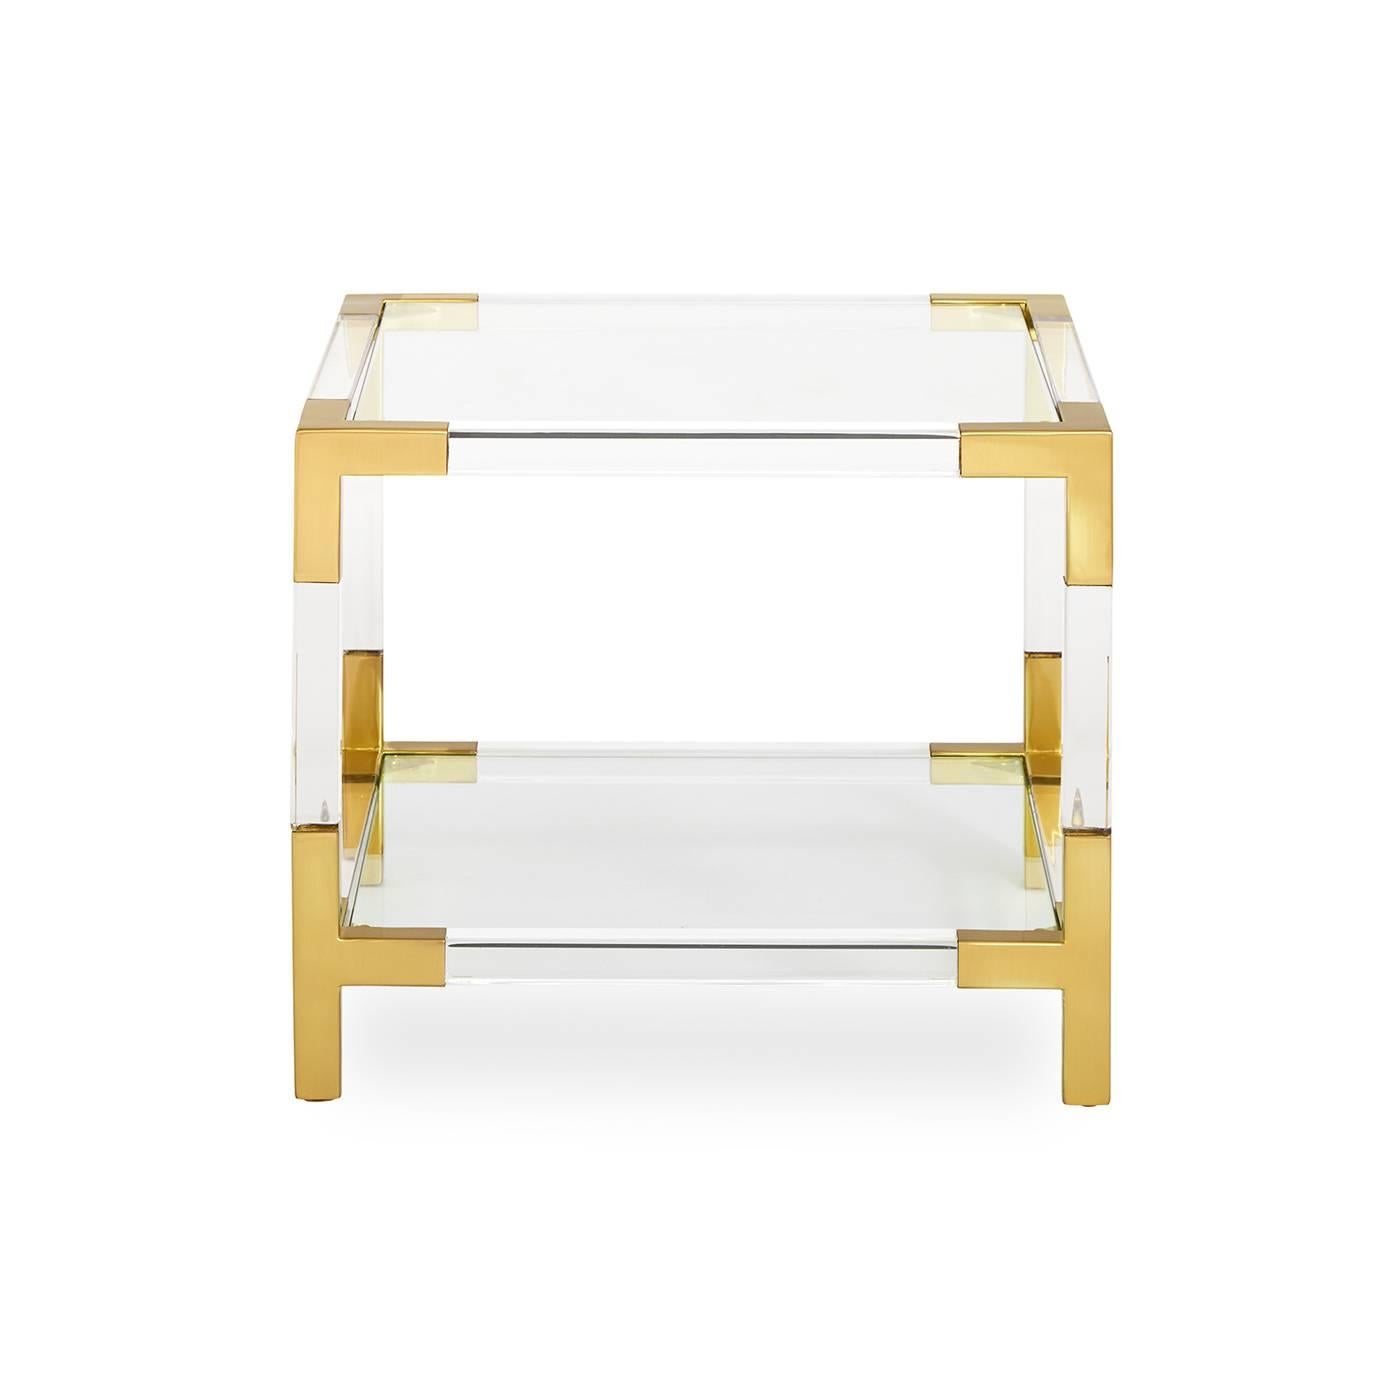 Clearly cool. Our Jacques collection is the perfect blend of simplicity and glamour, modern and traditional. In clear Lucite with brushed brass accents, this petite cube is perfect next to your sofa, by your bed, or saddled up next to your favourite